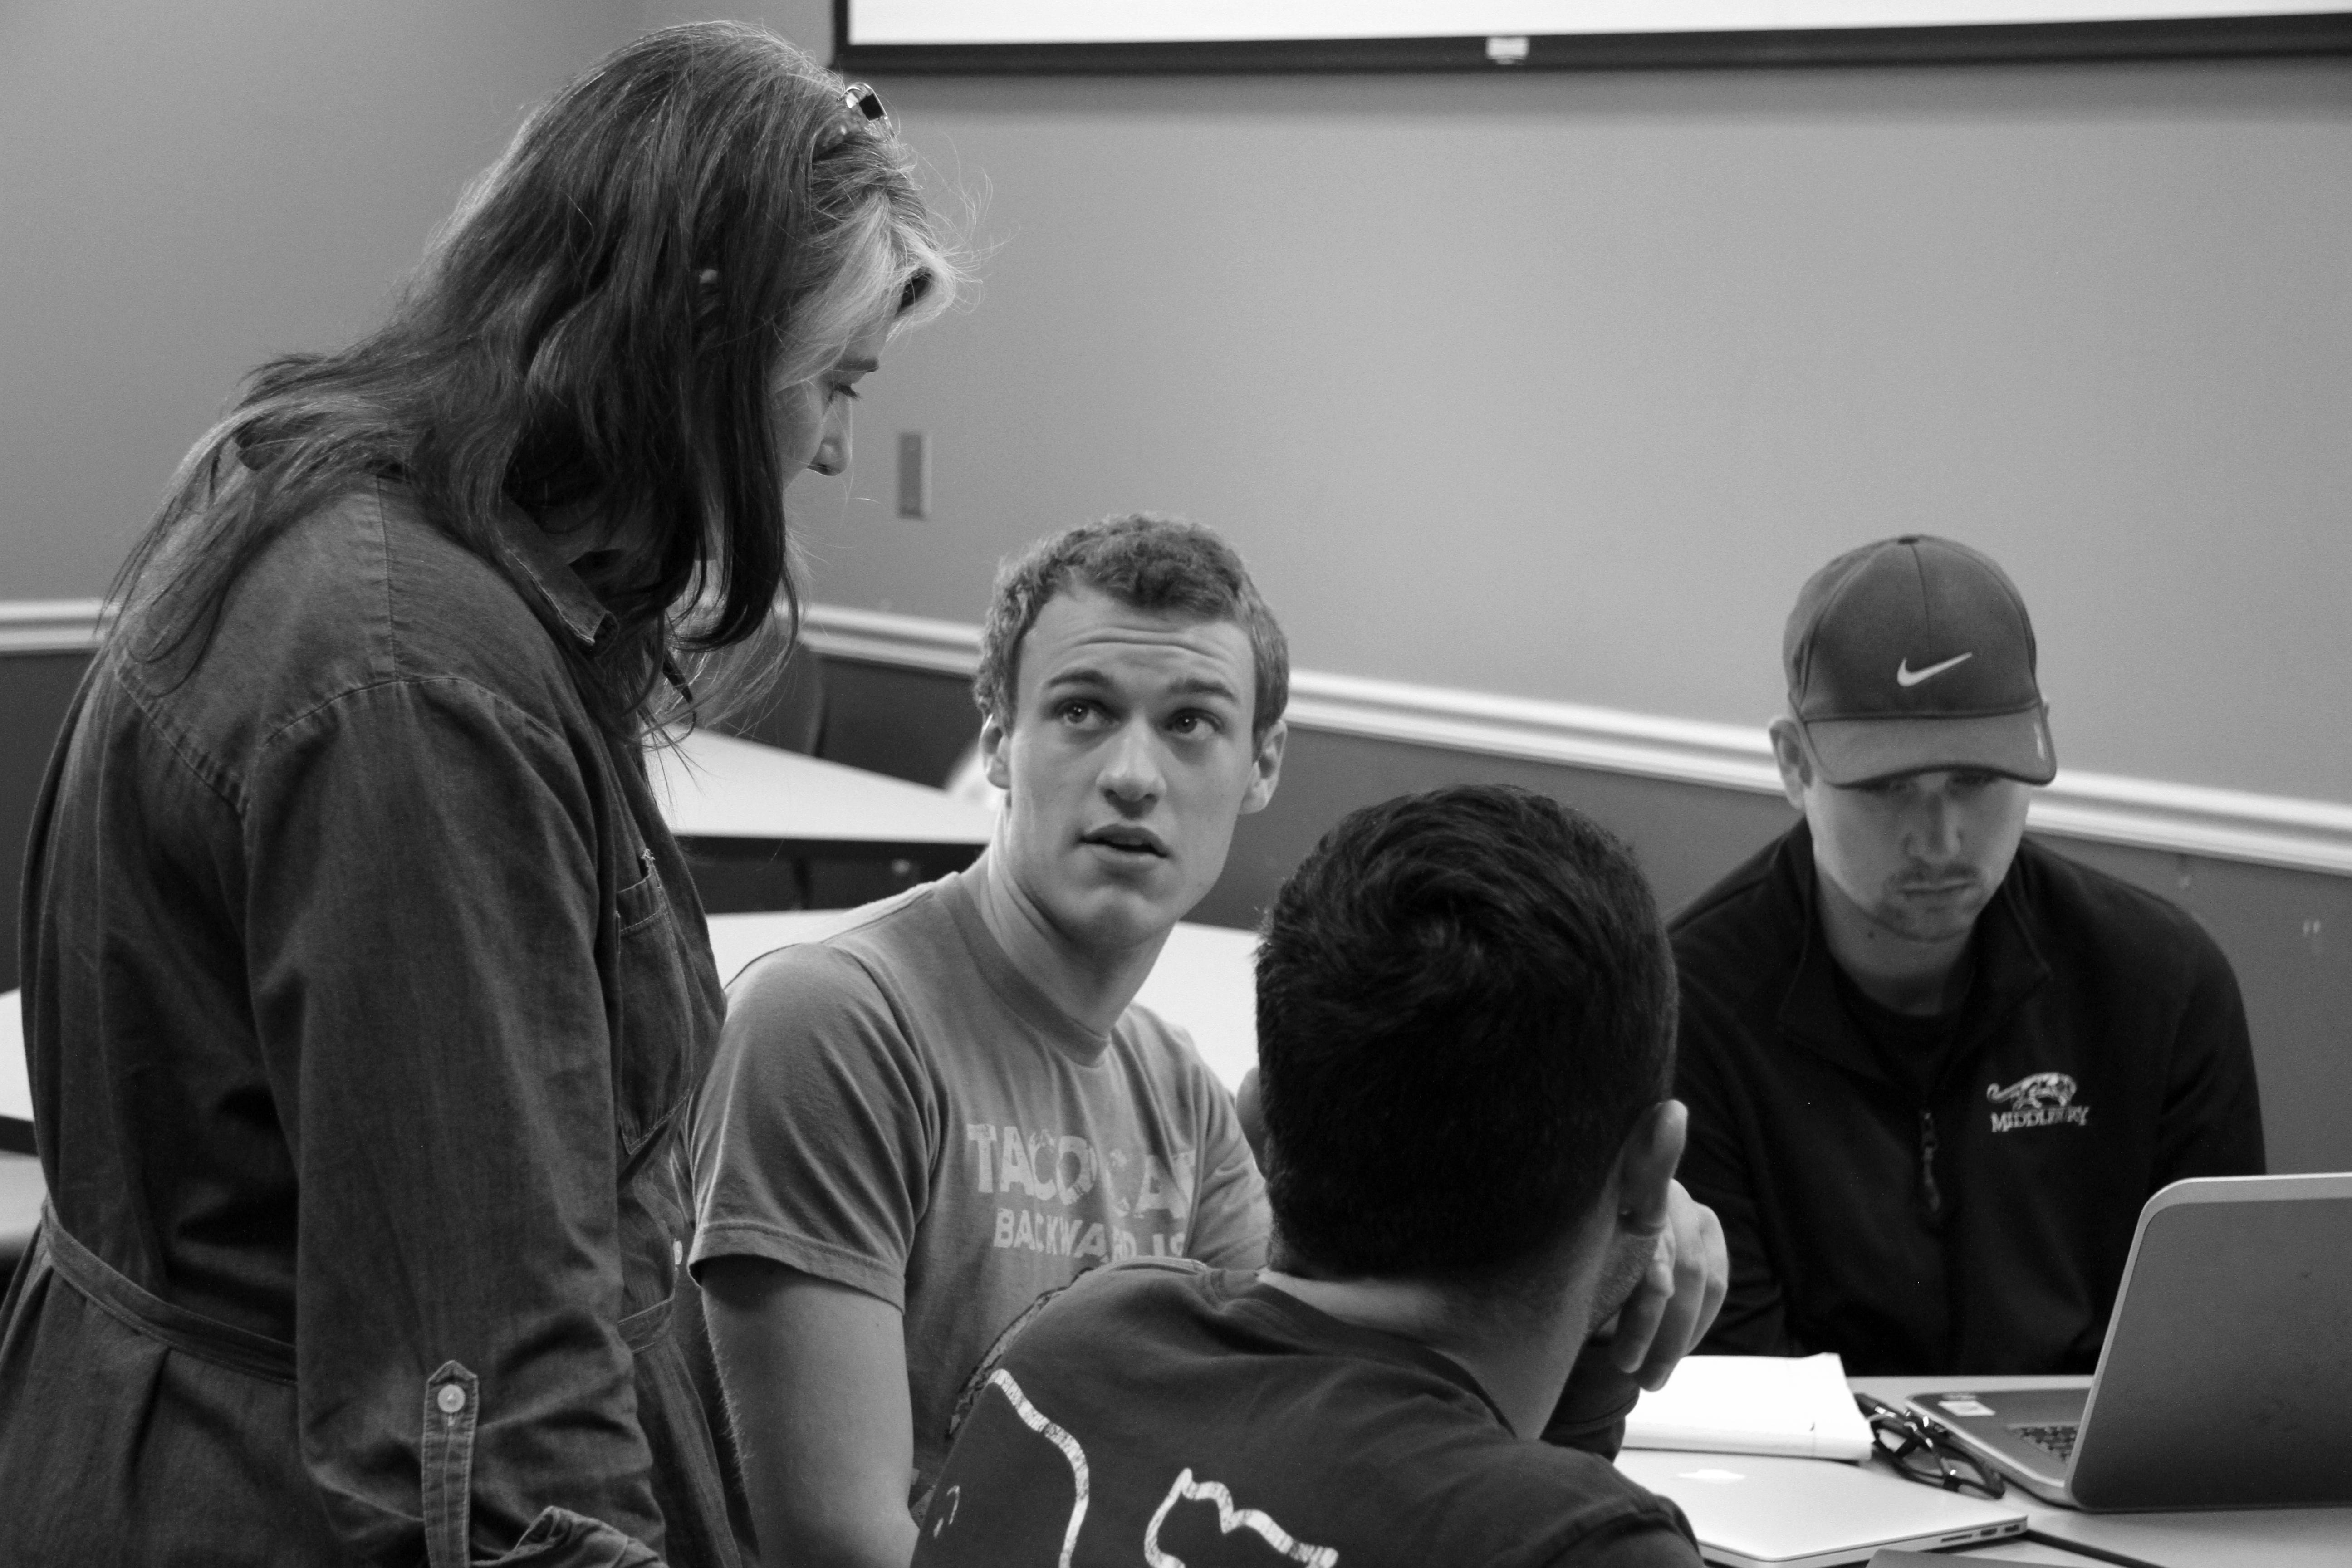 Home page showing professor Gatti working with students